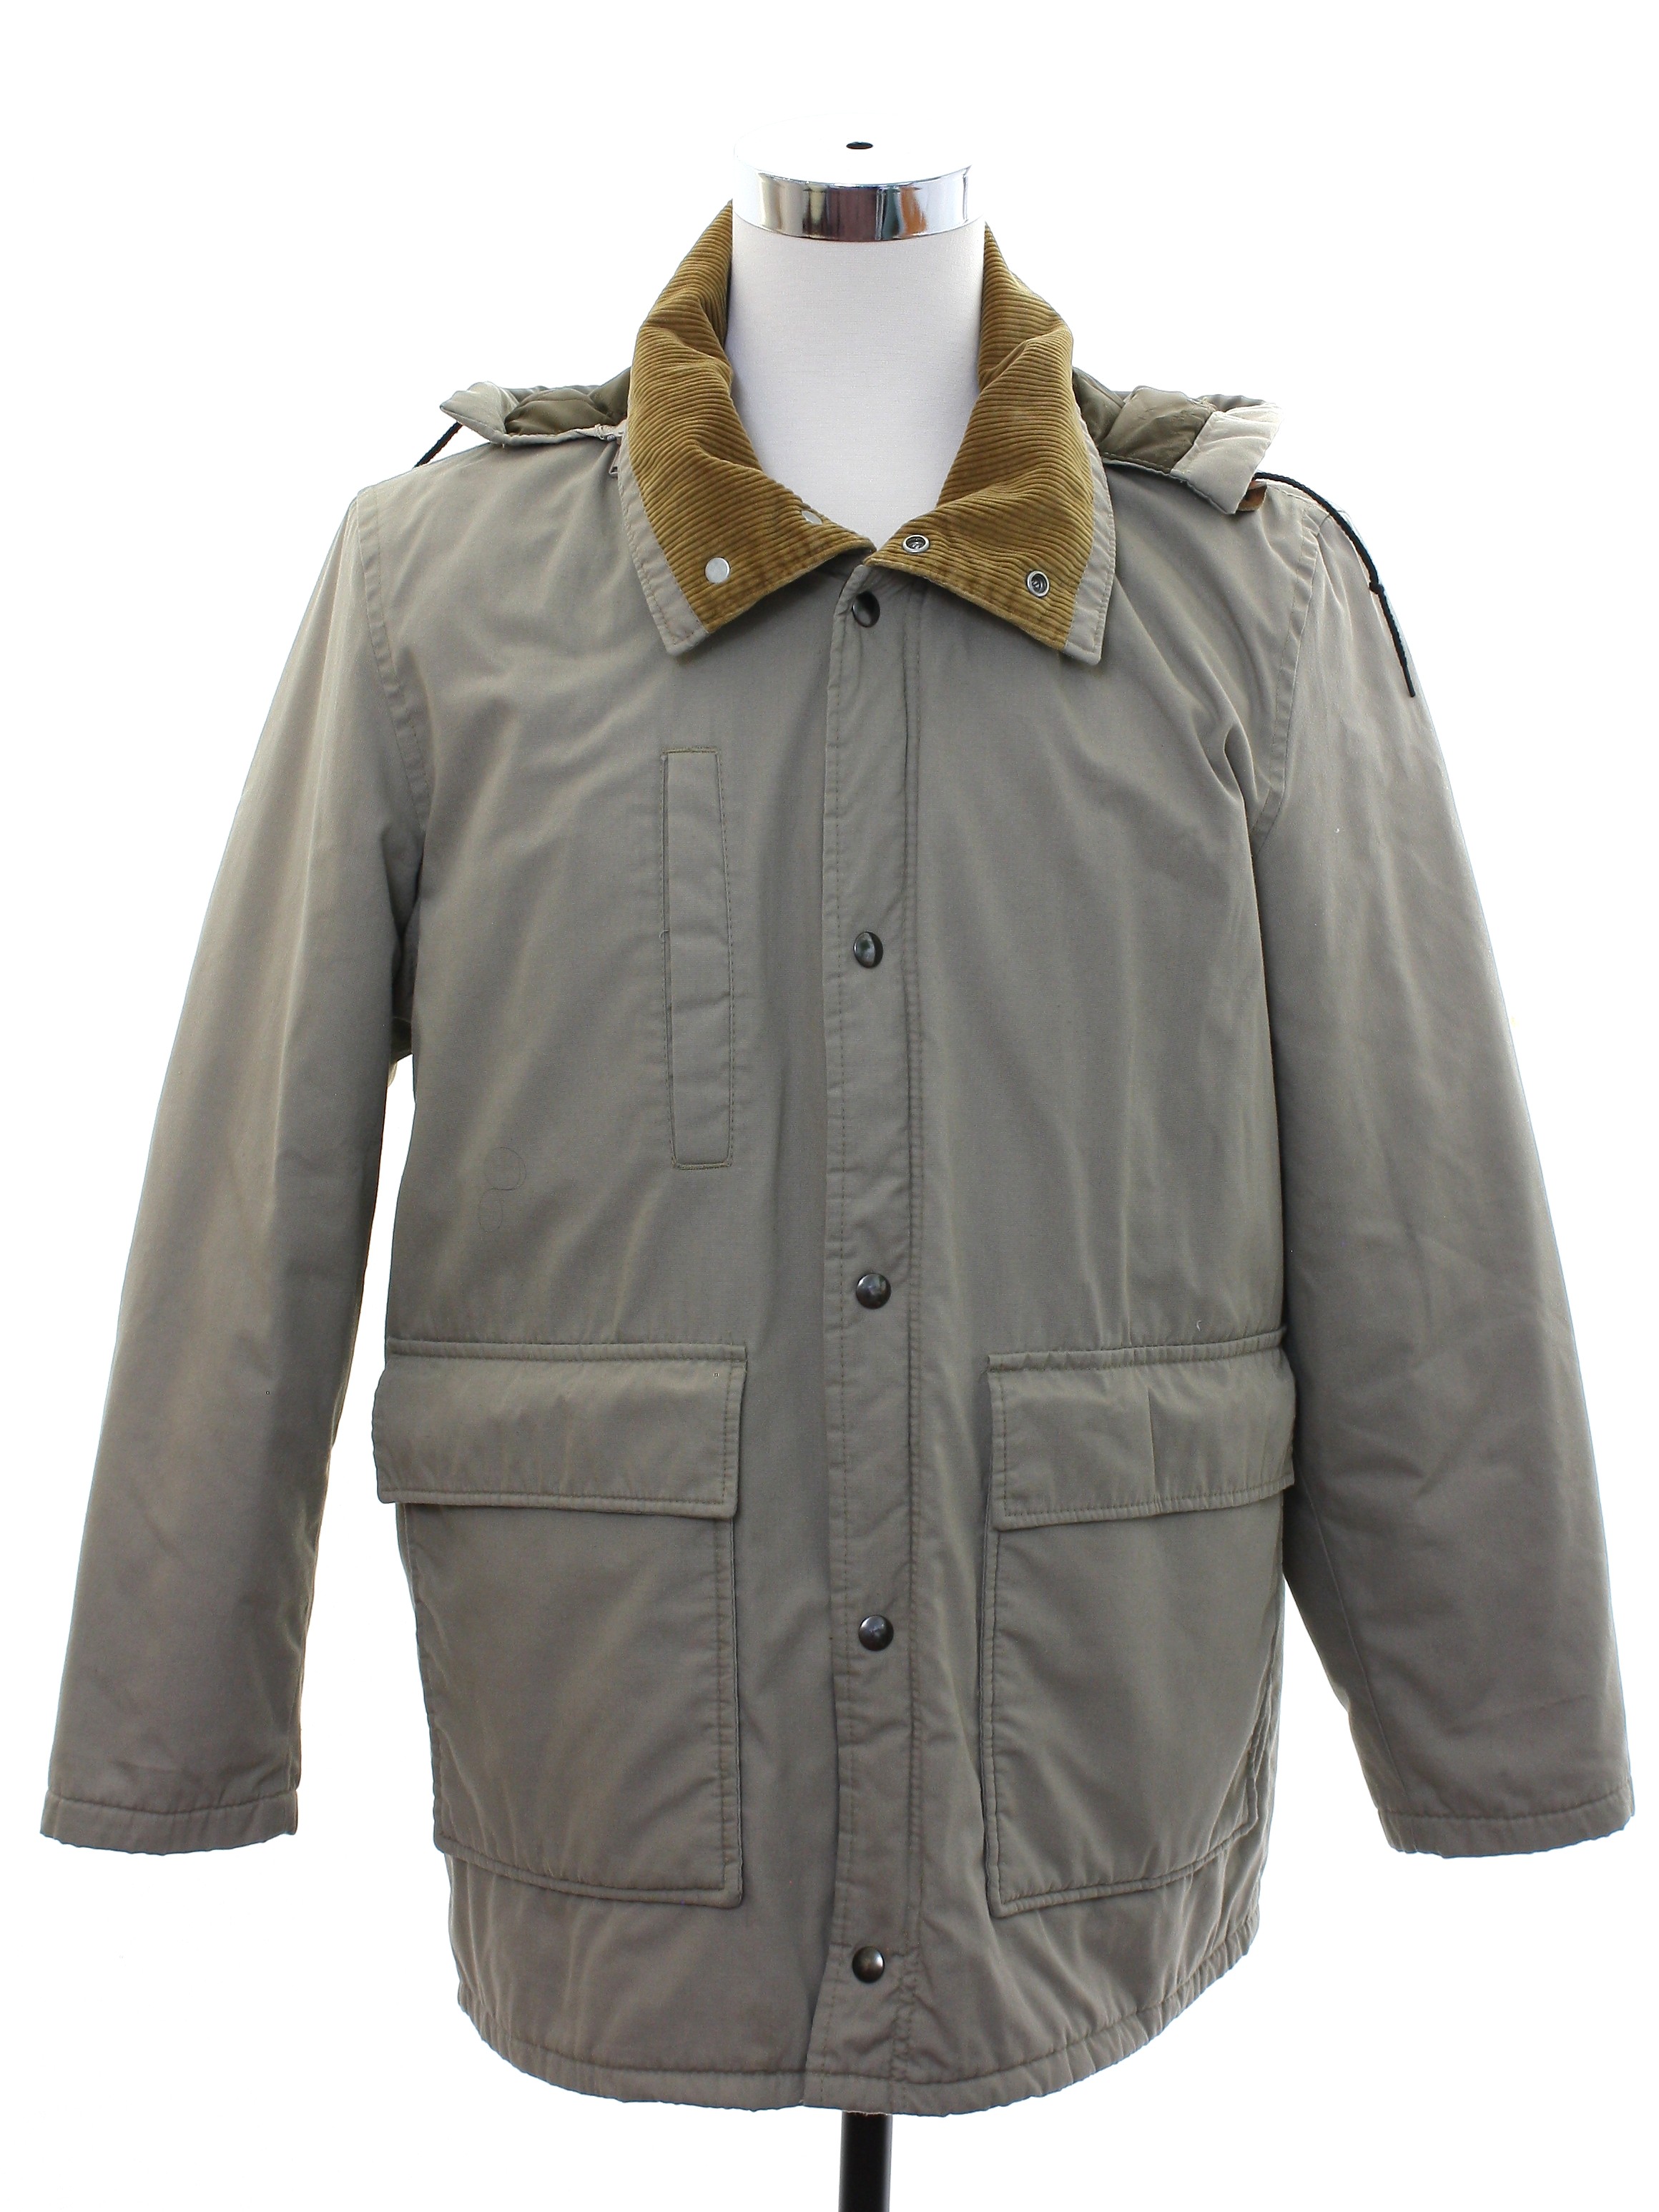 70's Ariens Field and Stream Jacket: Late 70s or Early 80s -Ariens ...